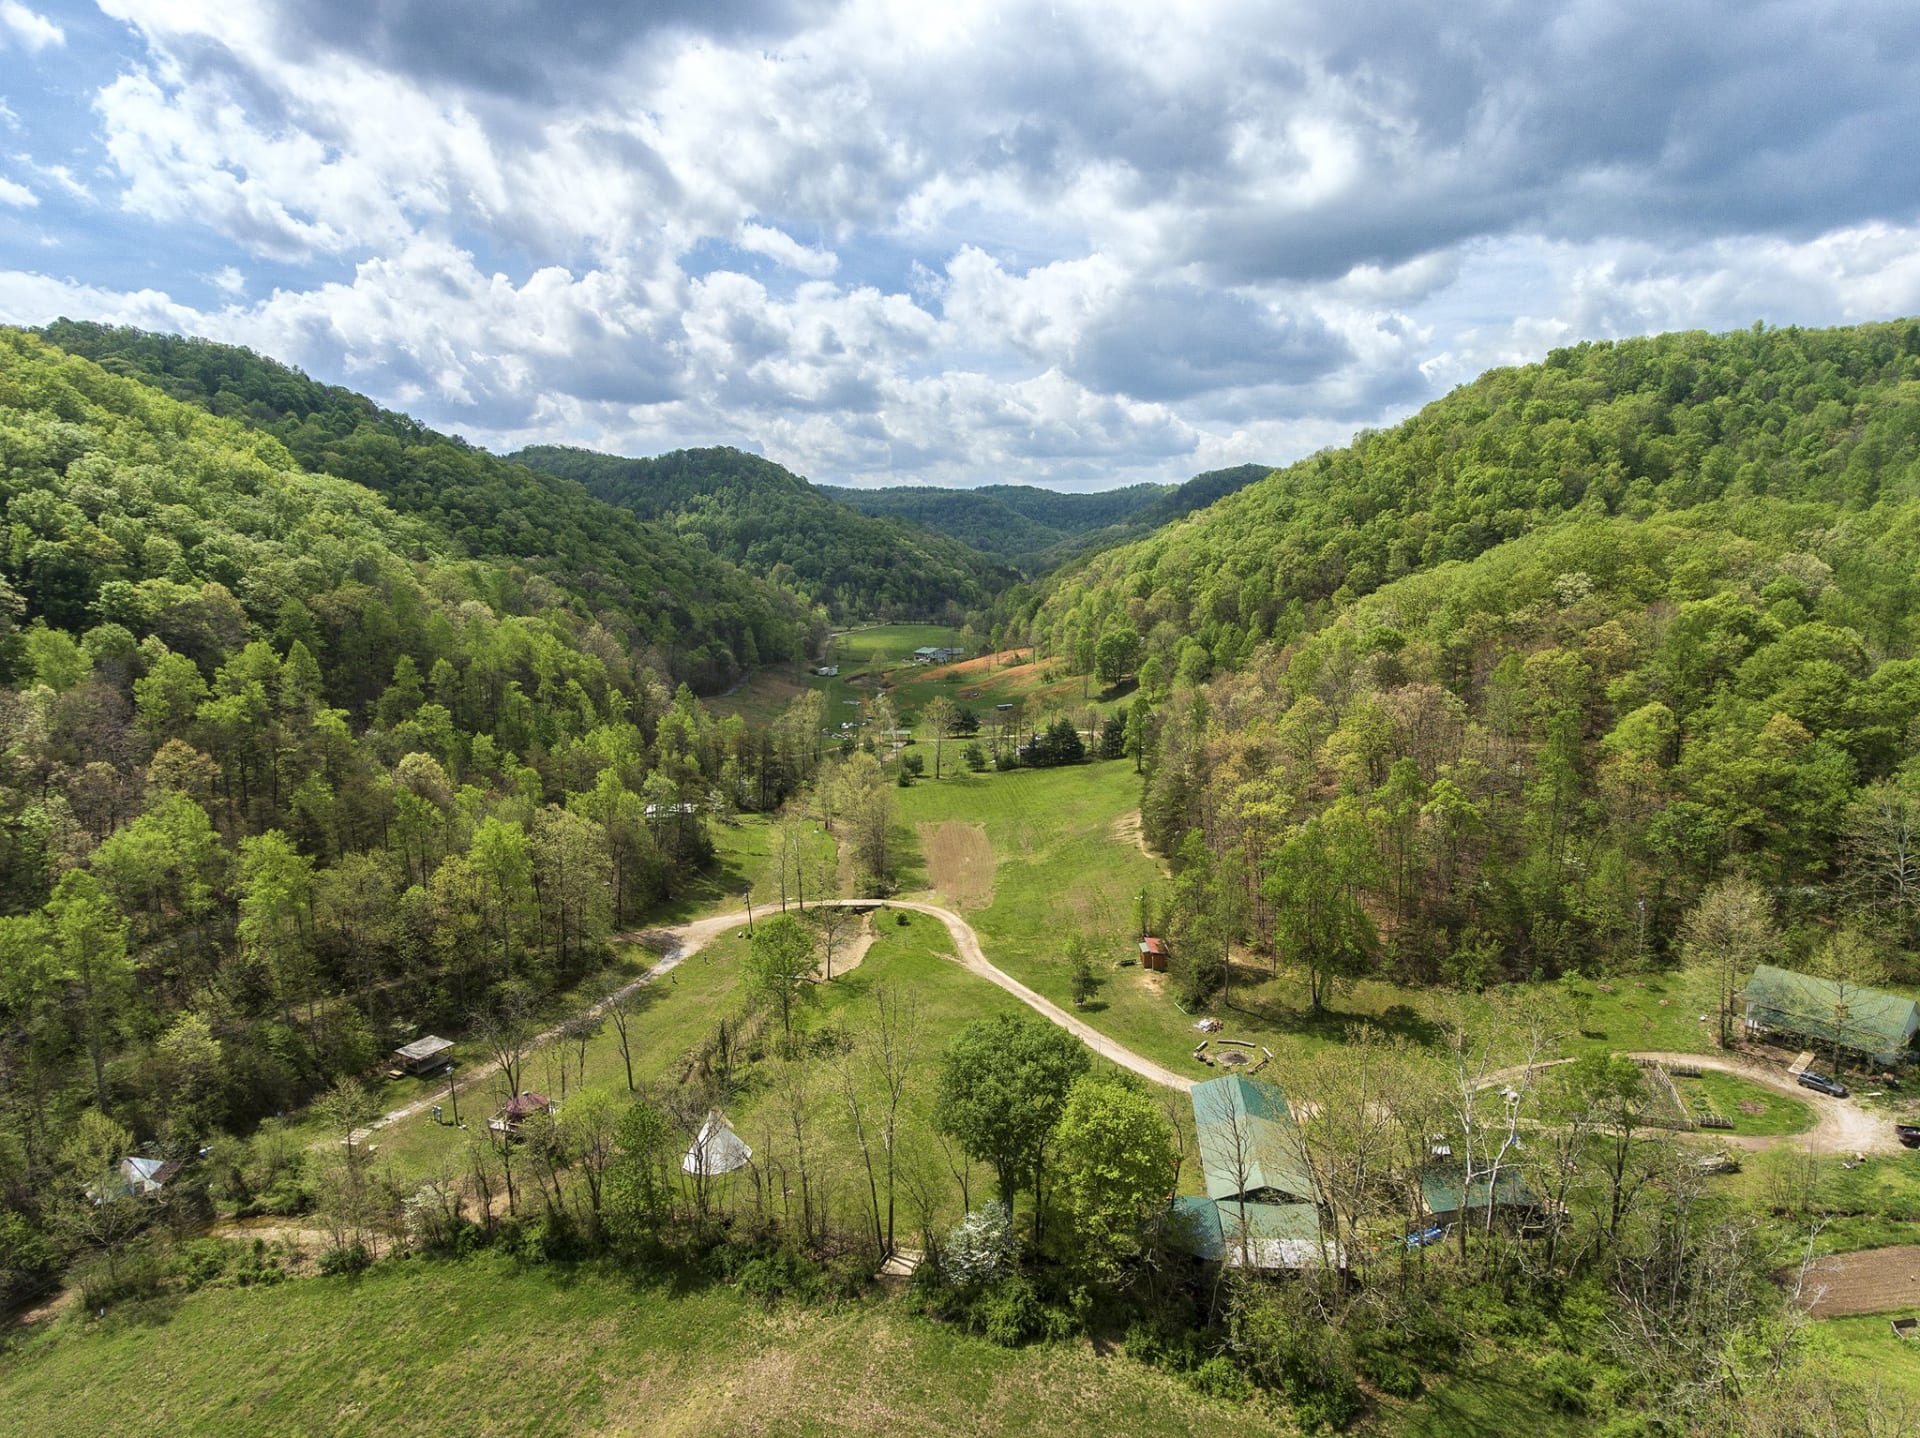 A bird's eye view of our holler.